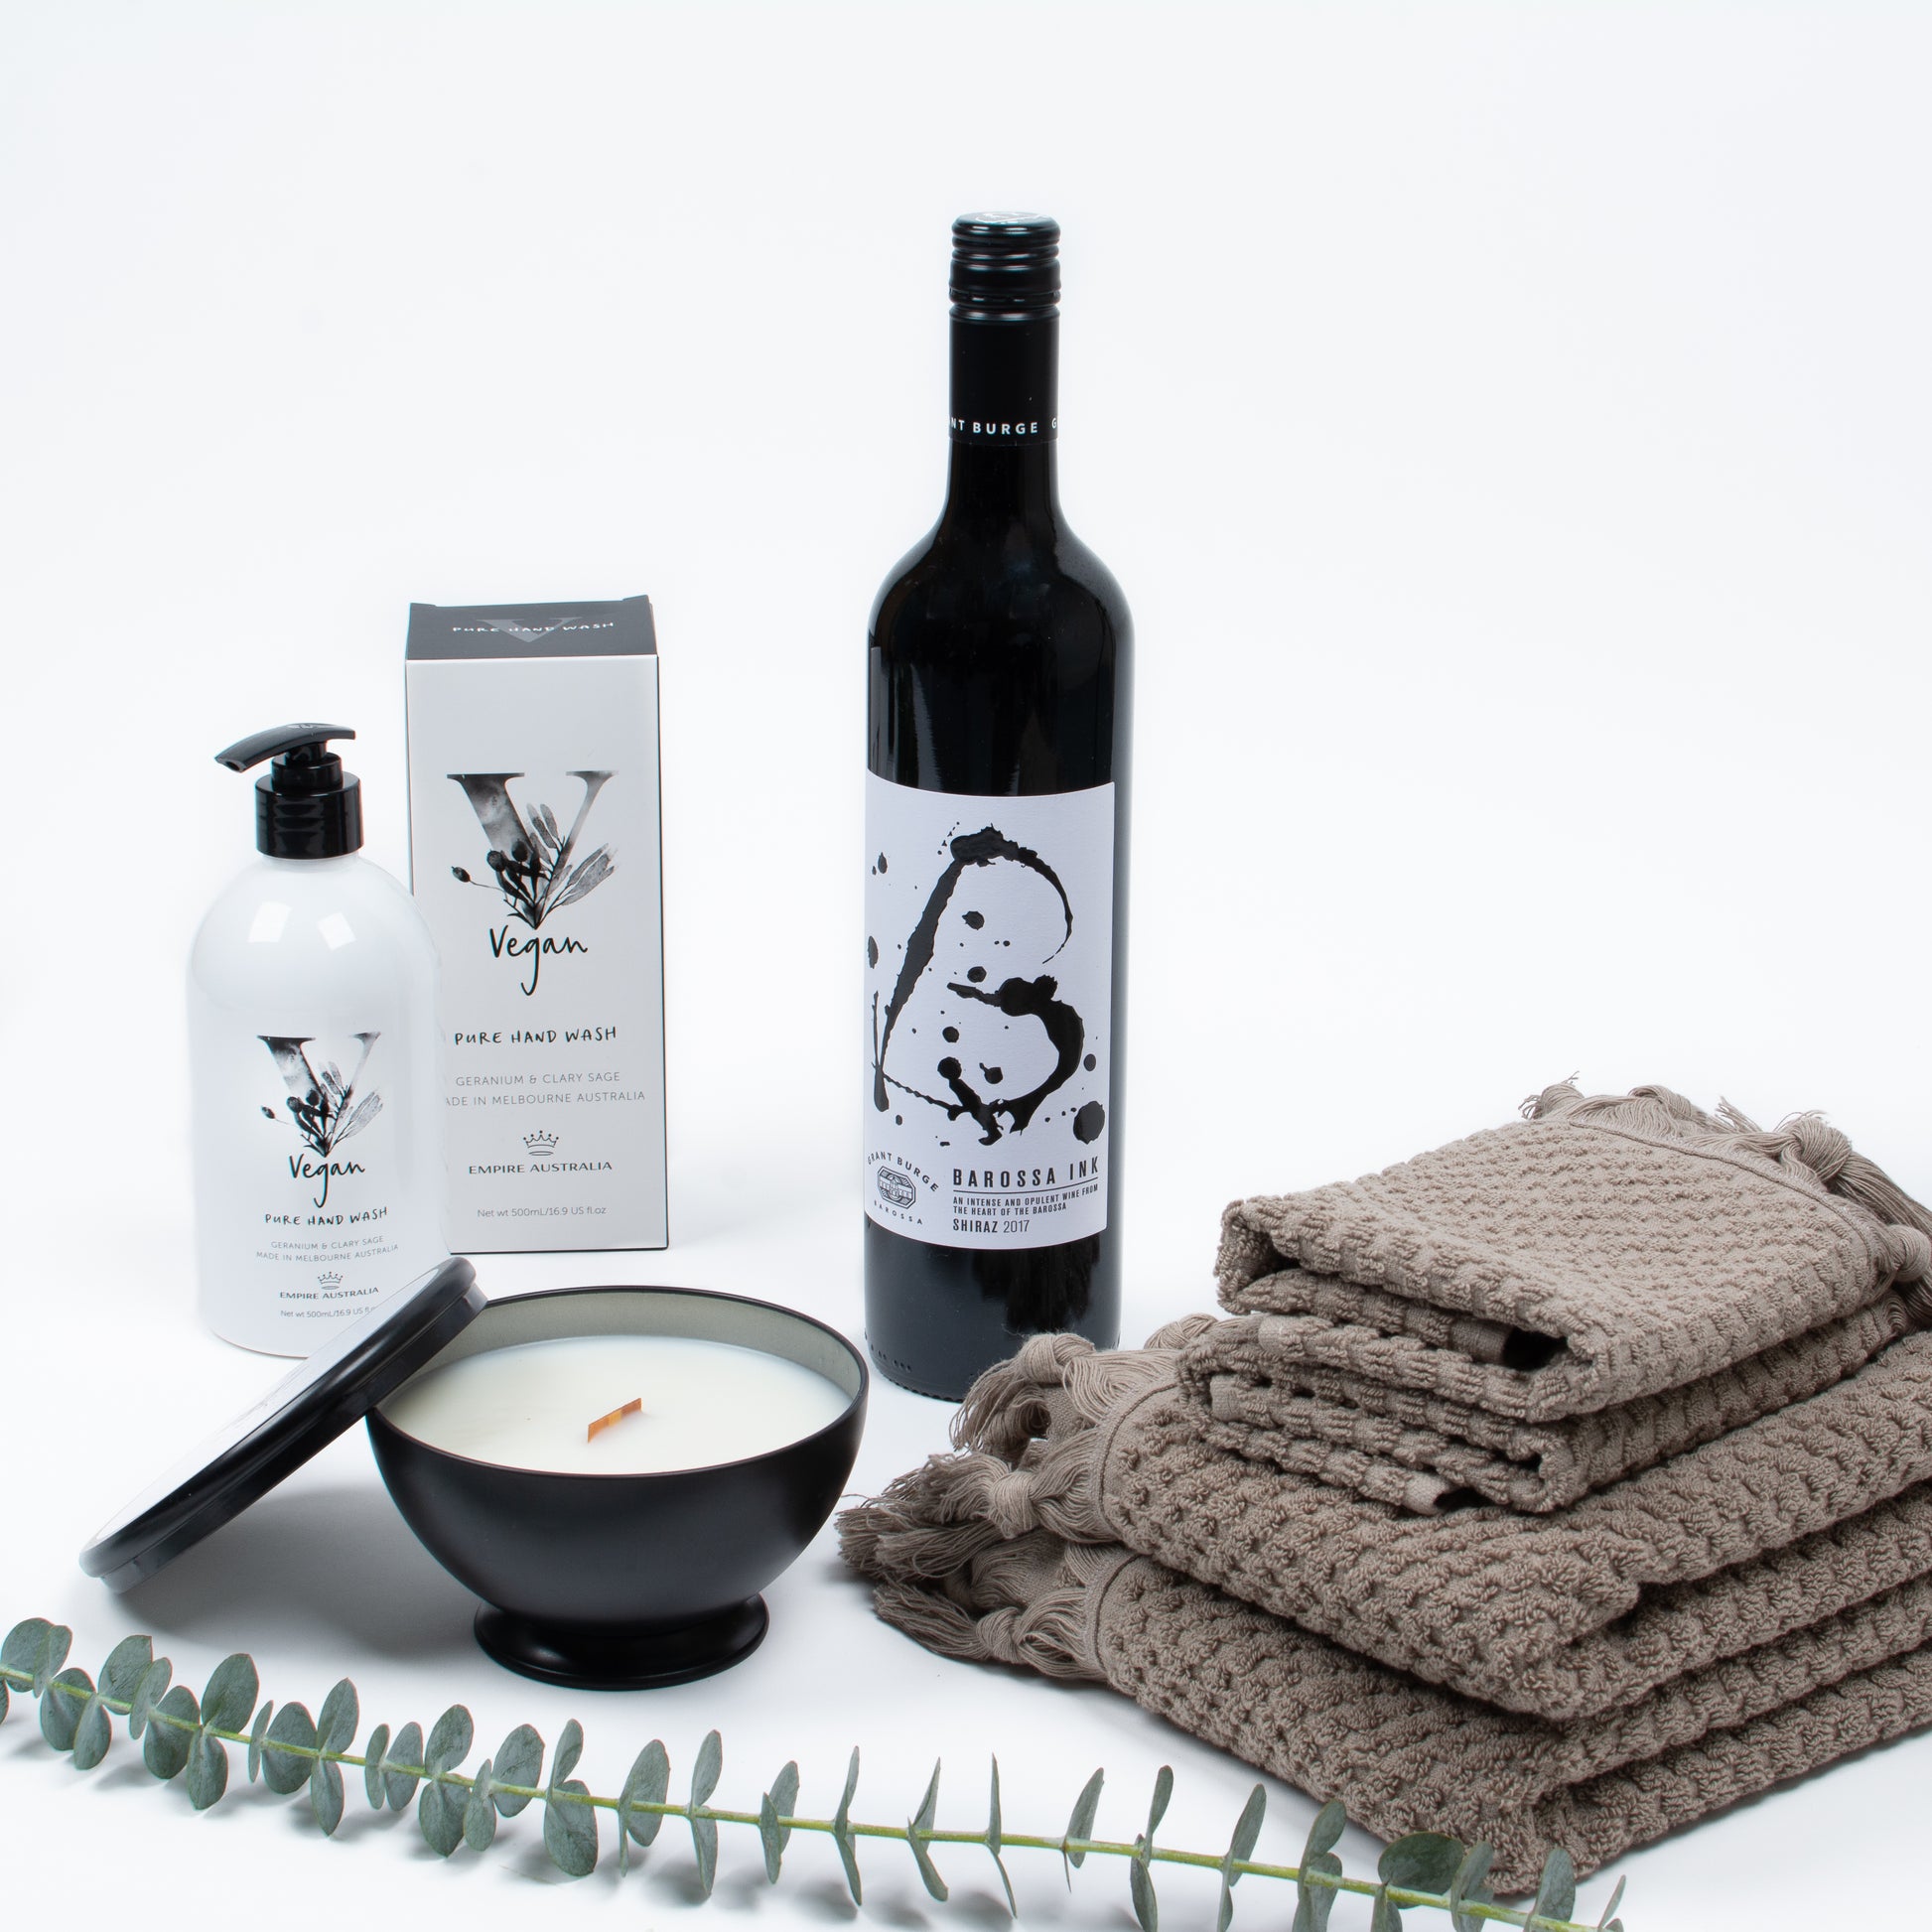 Products featured out of gift box are hand towels, facecloths, red wine, candle, hand wash.